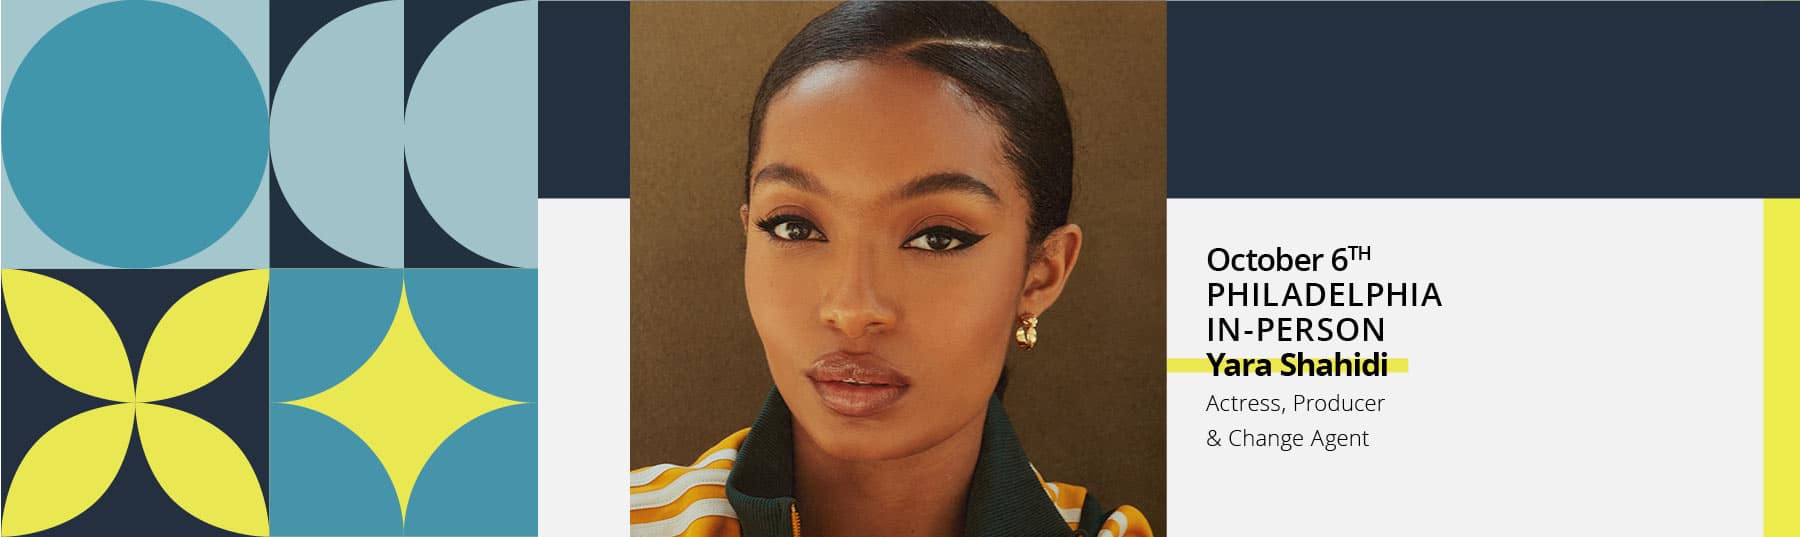 Join Yara Shahidi in-person on October 6th at the Pennsylvania Conference for Women